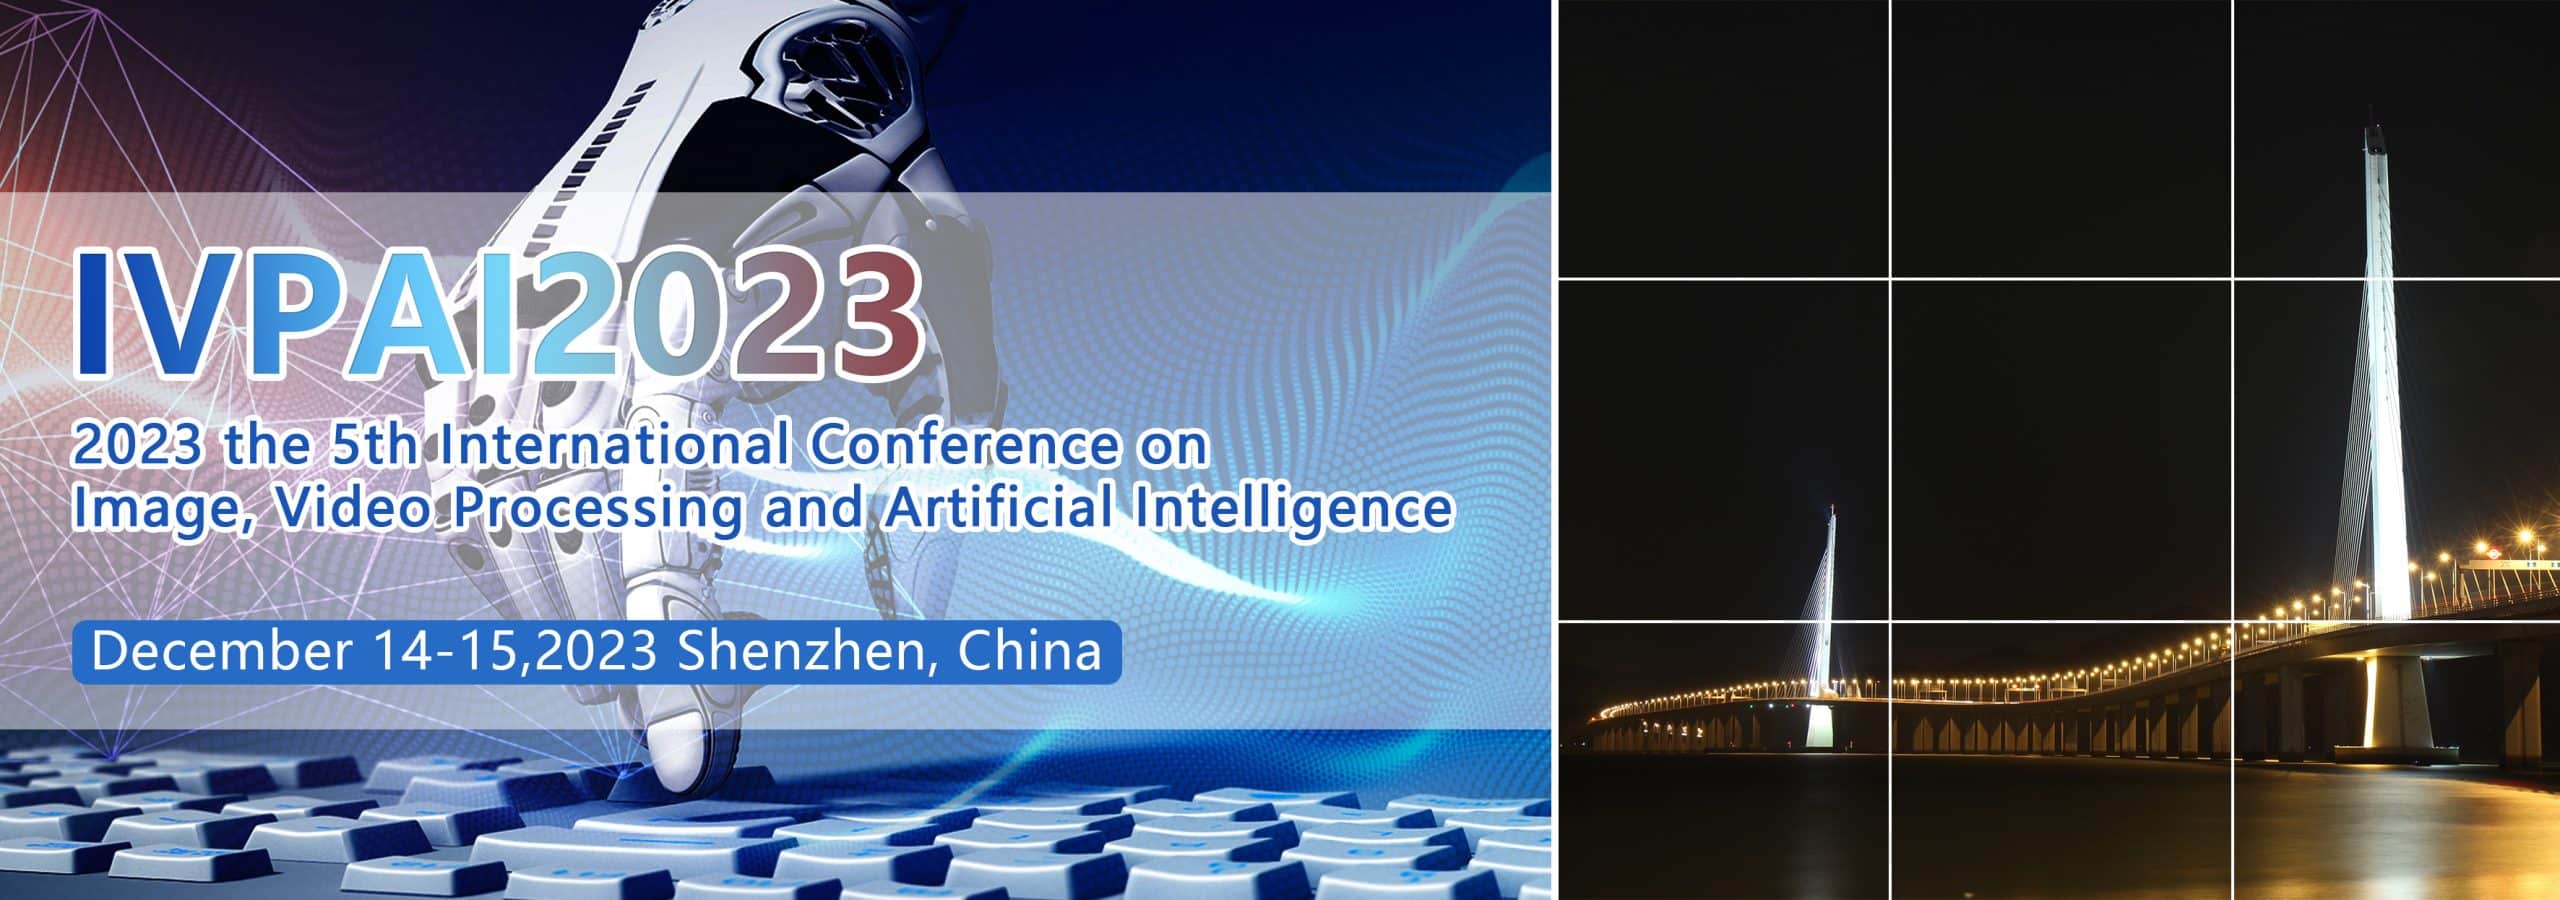 5th International conference on Image, Video Processing and Artificial Intelligence